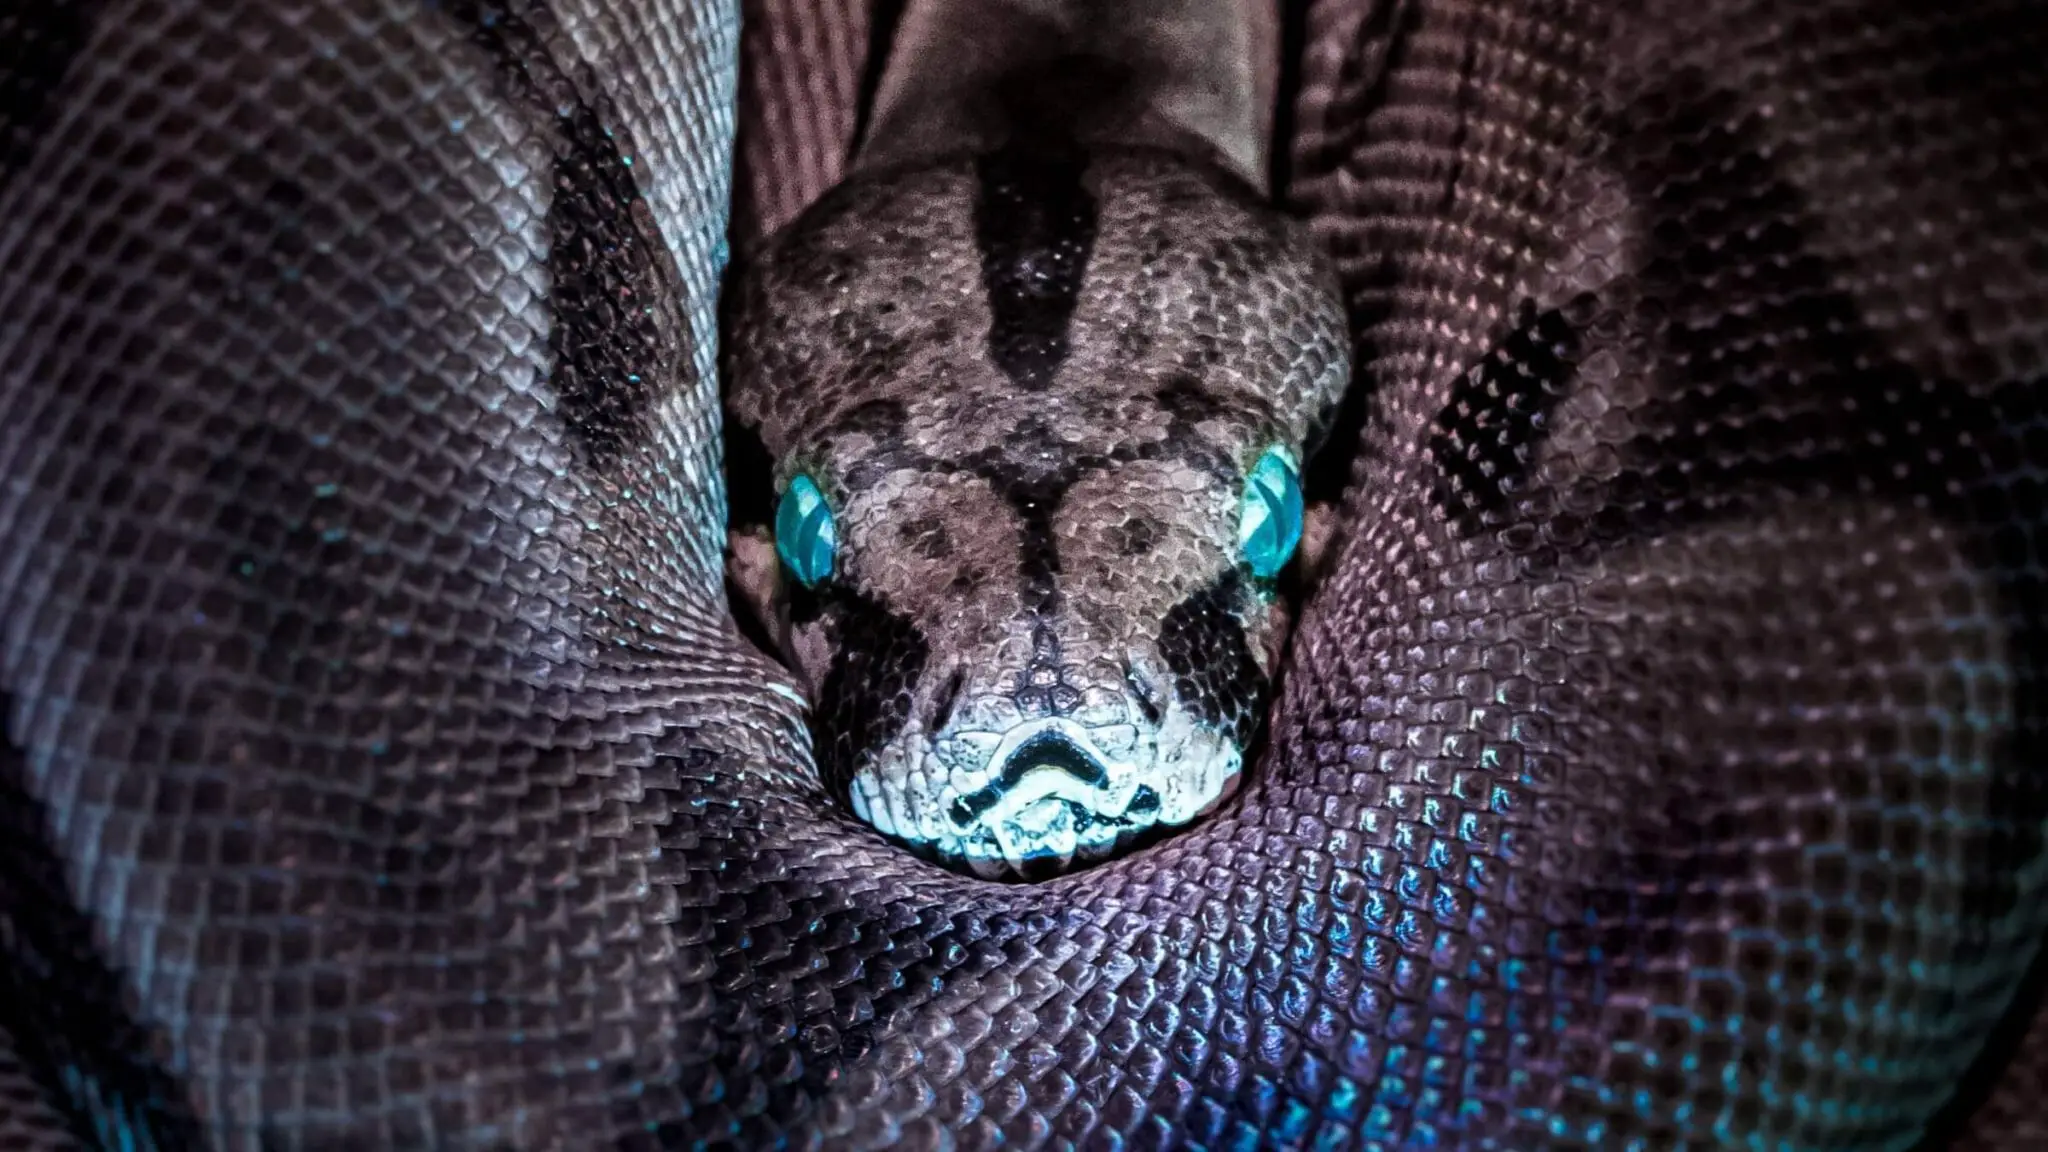 Coiled python snake with green eyes on head in center of body.